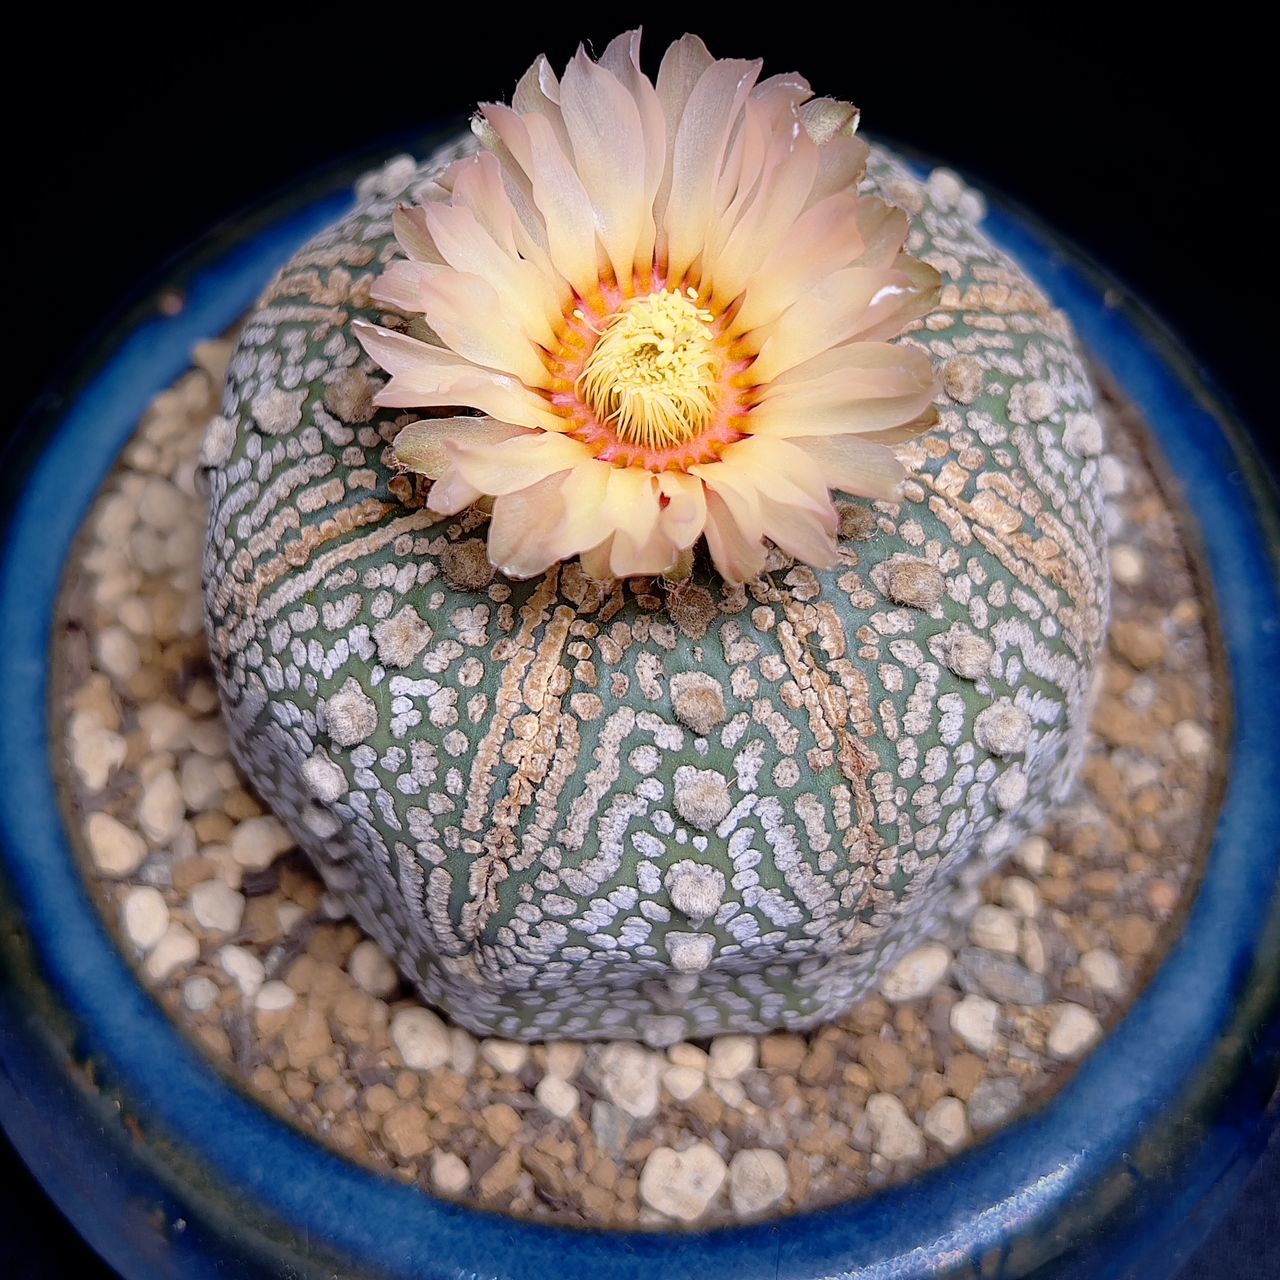 Super Kabuto Astrophytum Cactus Flower Cactus Freshness Plant Food And Drink Close-up Food Wellbeing Nature Flower No People Flowering Plant Seed Healthy Eating Circle Indoors  Geometric Shape High Angle View Directly Above Shape Concentric First Eyeem Photo